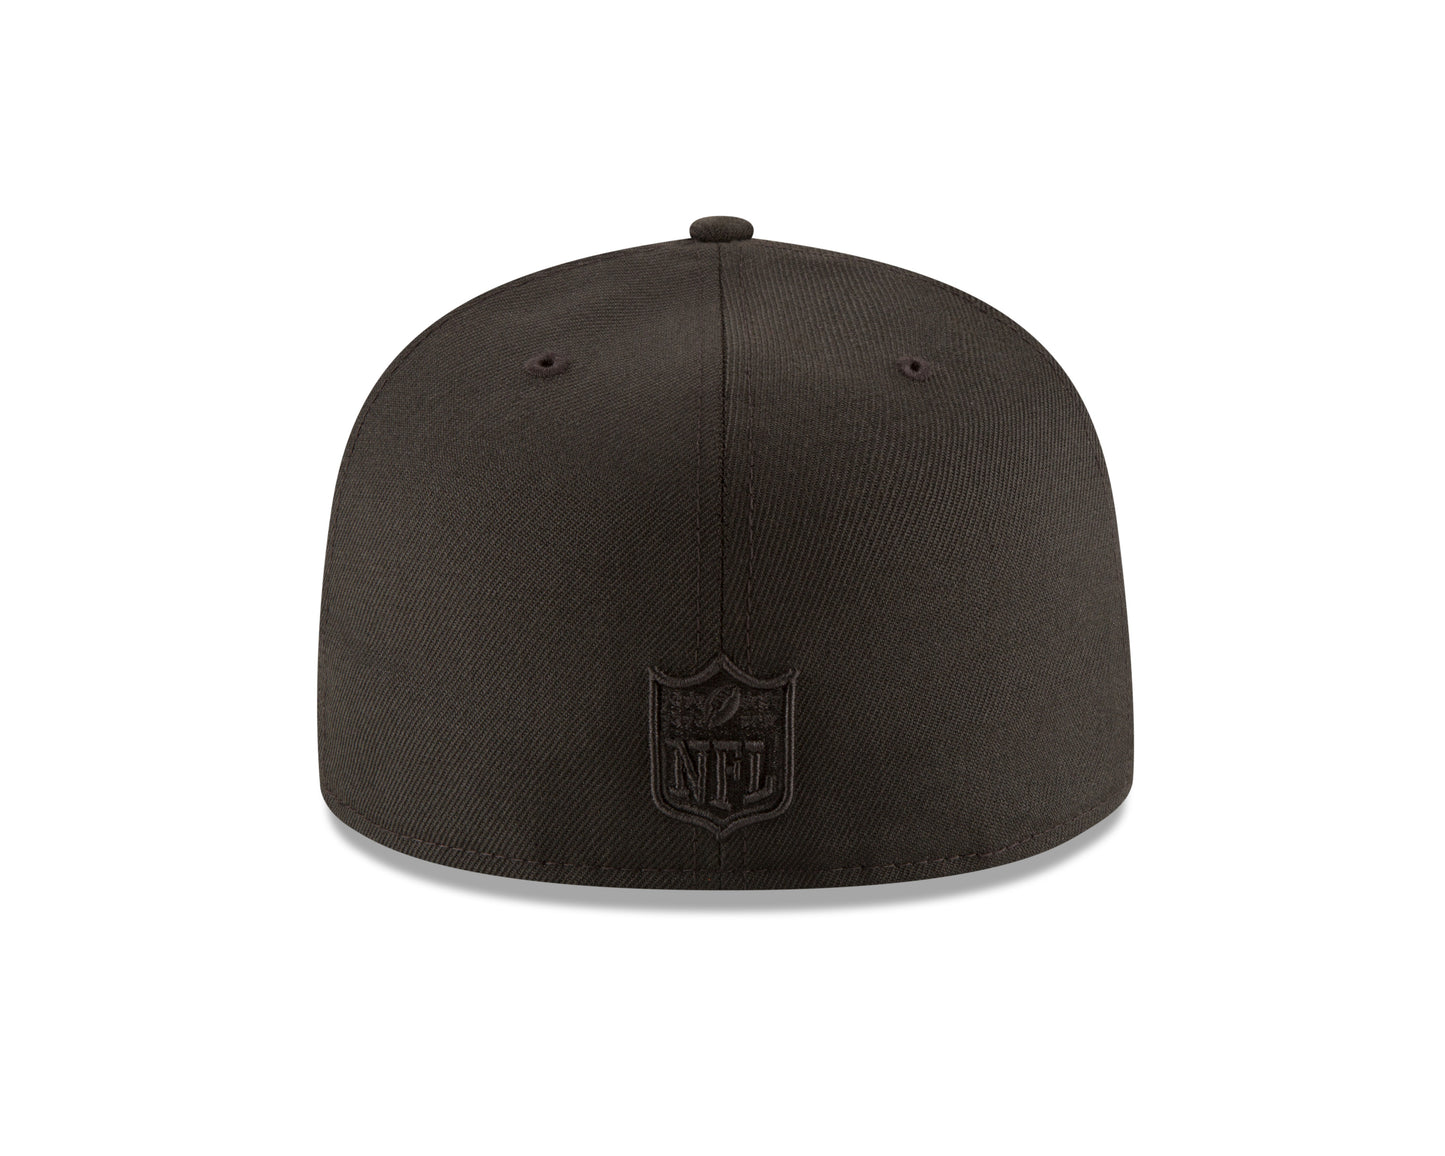 Indianapolis Colts New Era Black on Black 59FIFTY Fitted Hat - Black